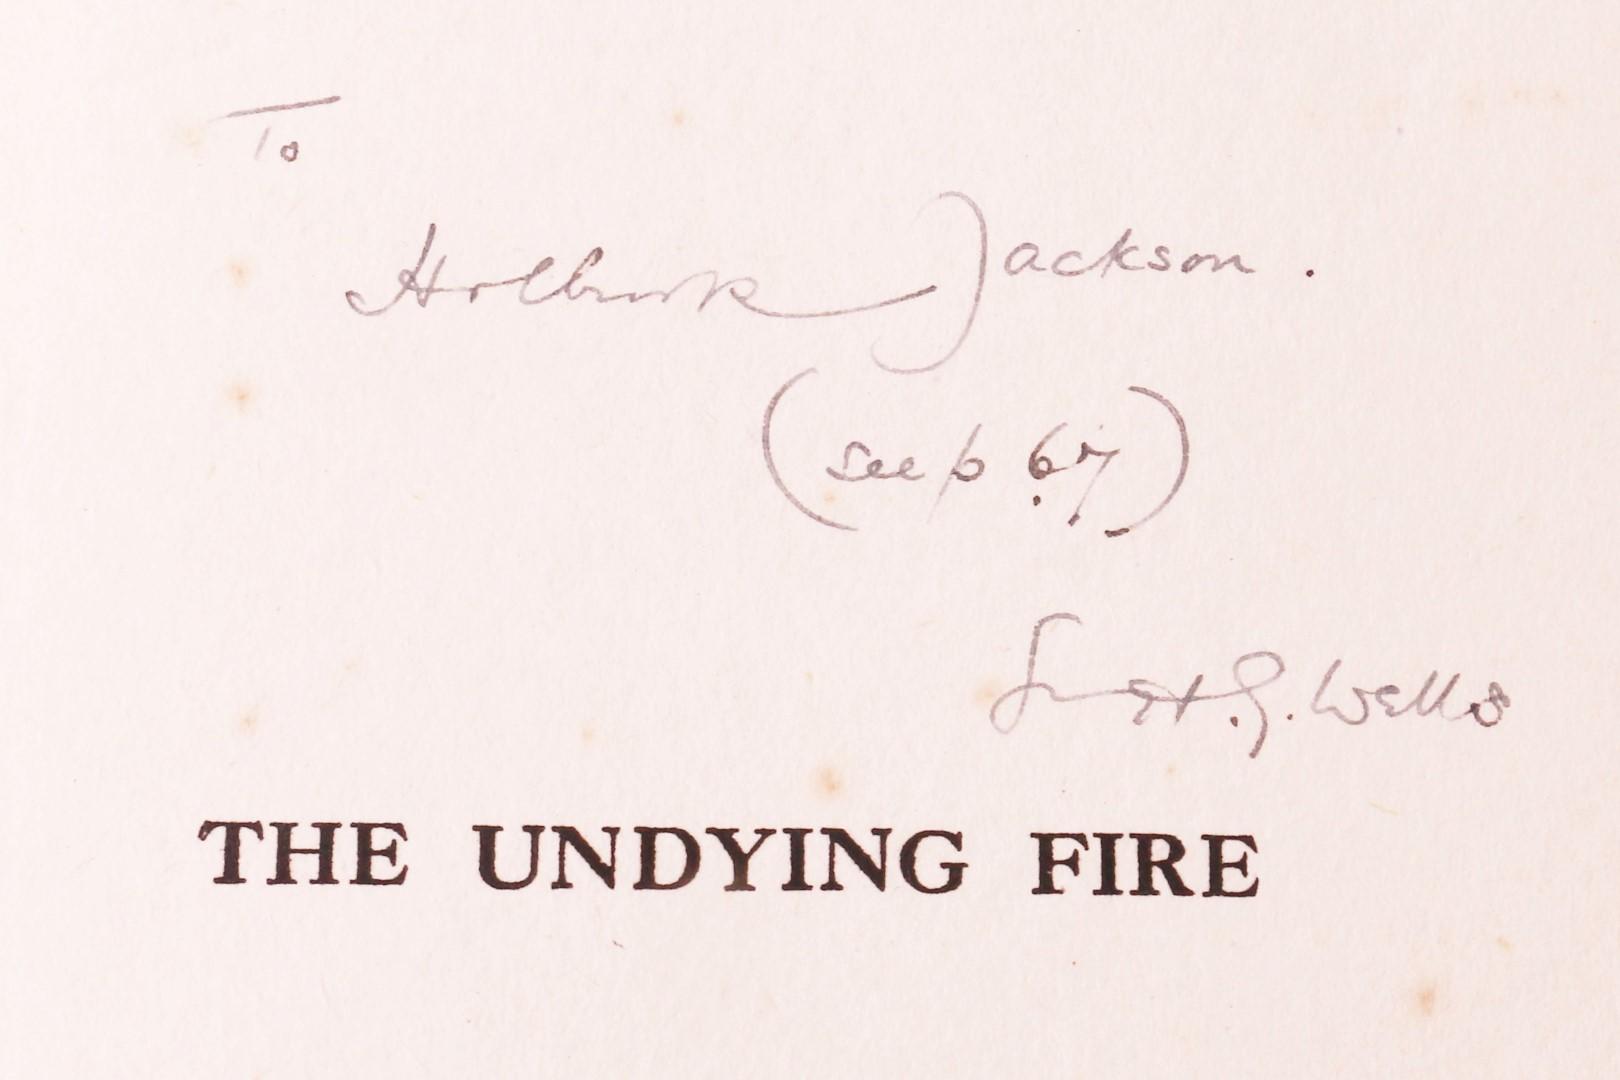 H.G. Wells - The Undying Fire - Cassell, 1919, Signed First Edition.